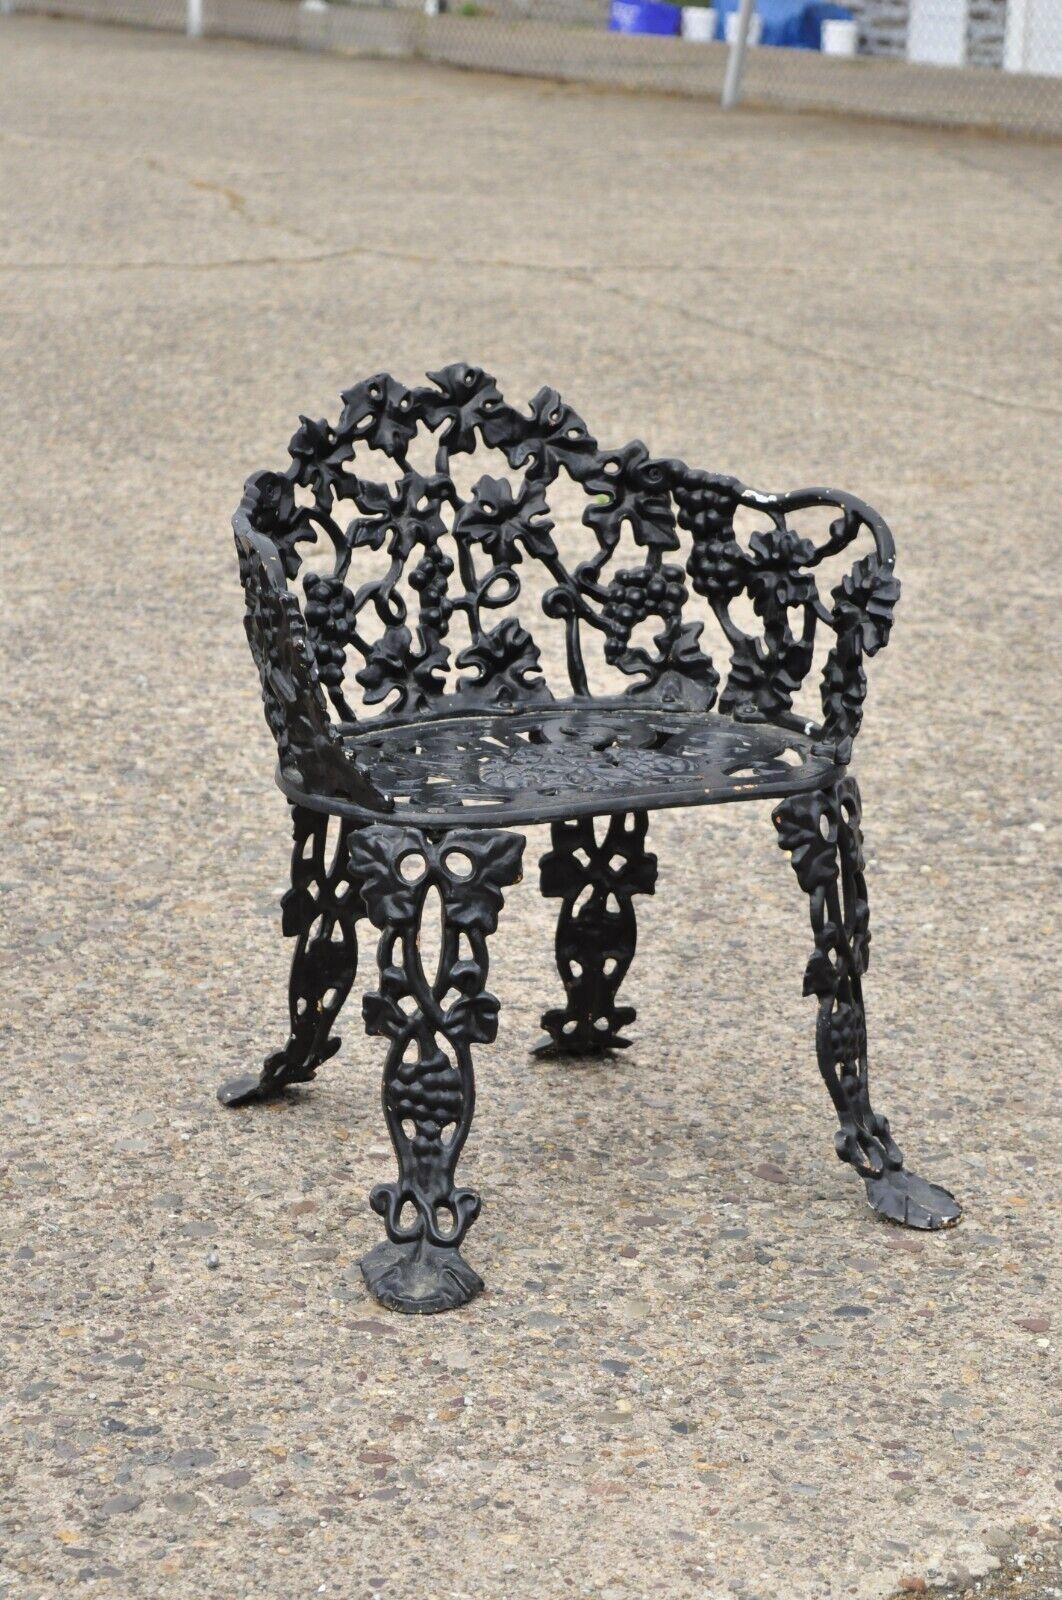 Vintage cast iron French Victorian grapevine small garden accent side chair. Item features a grapevine pattern with rare grapevine seat, cast iron construction, very nice antique item, great style and form. Circa early to mid-20th century.